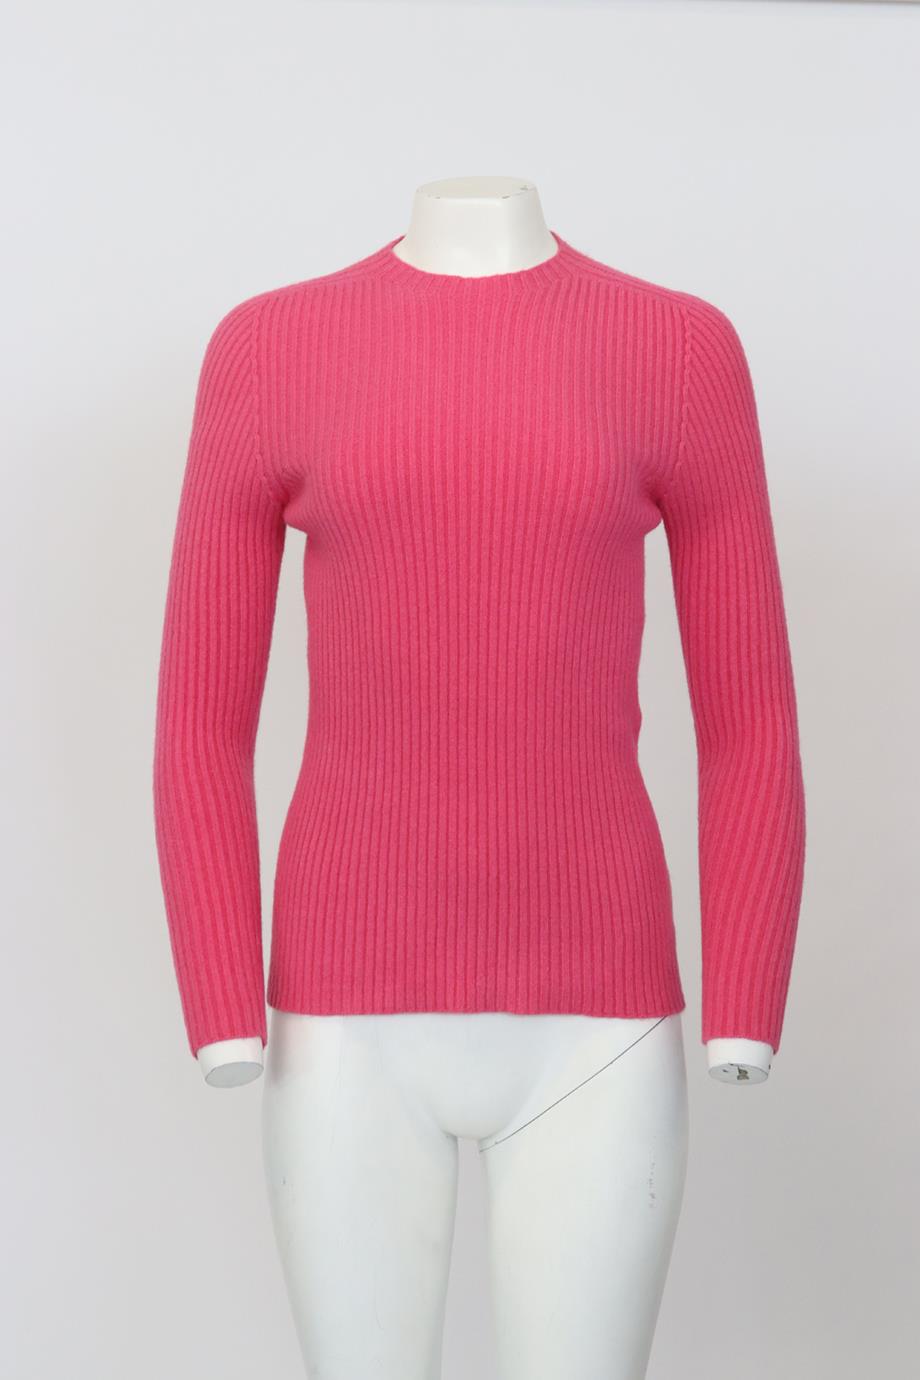 APPARIS RIBBED KNIT SWEATER SMALL